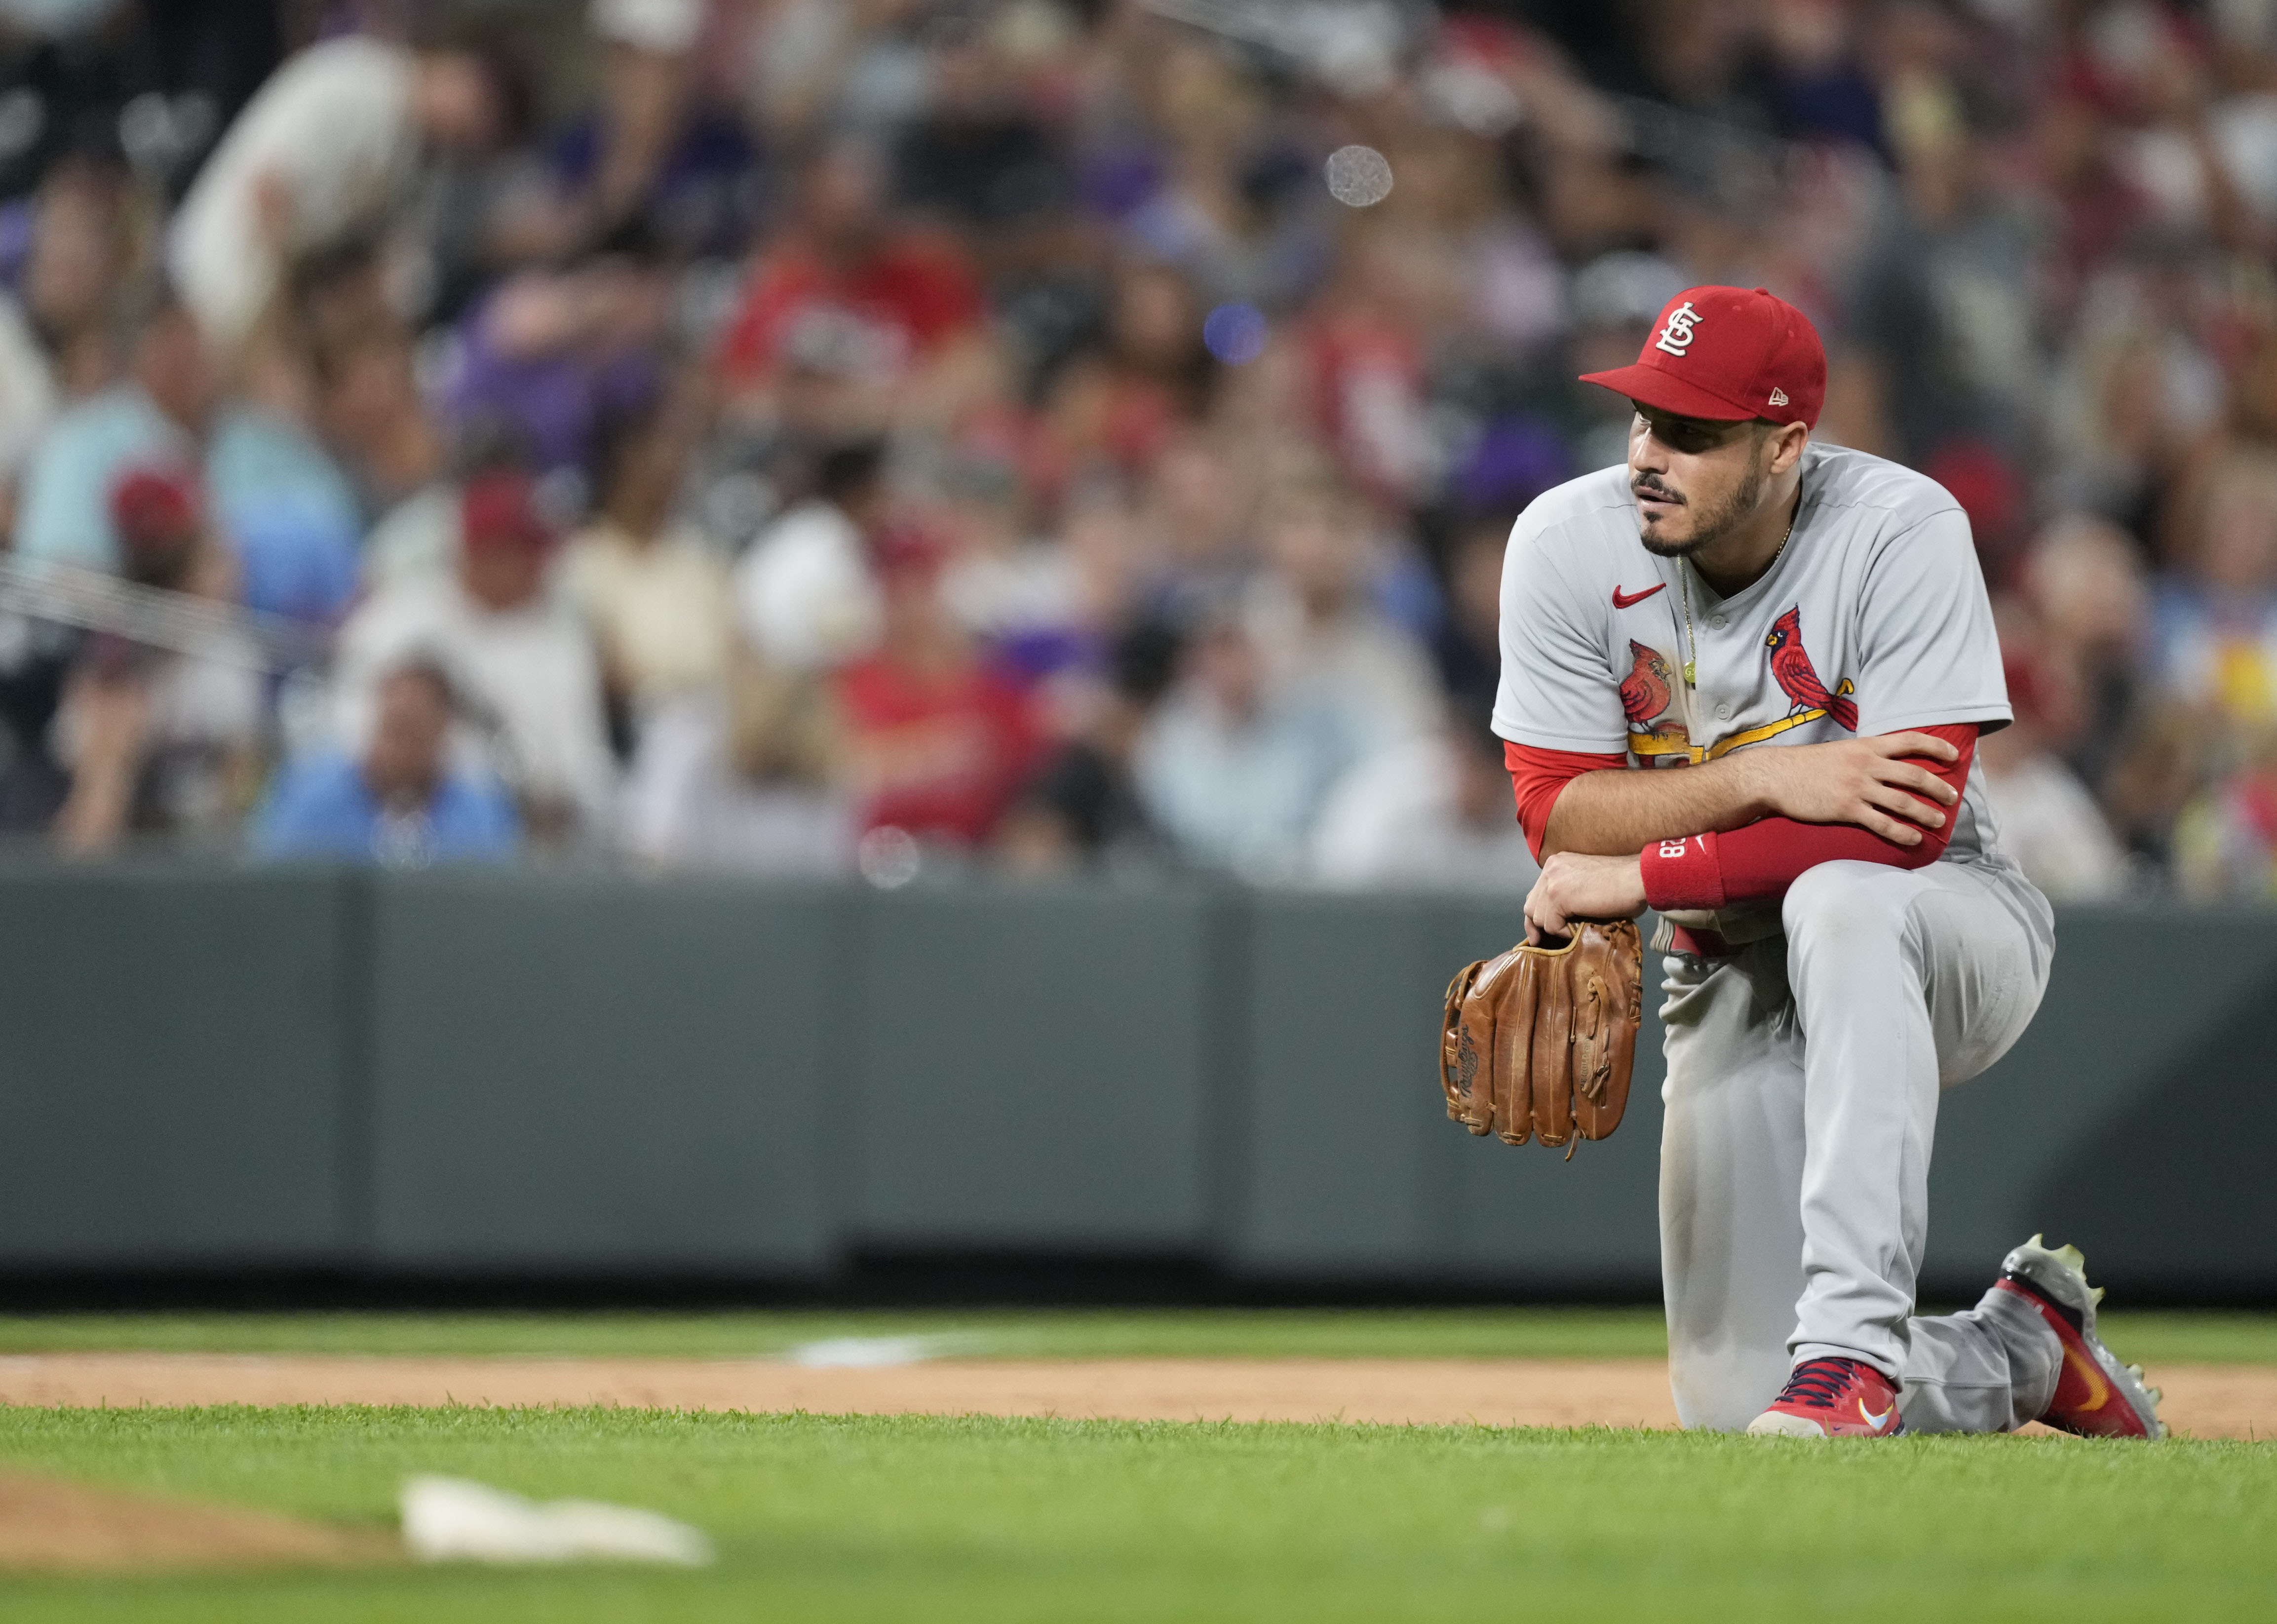 St. Louis Cardinals Albert Pujols watches a video tribute about